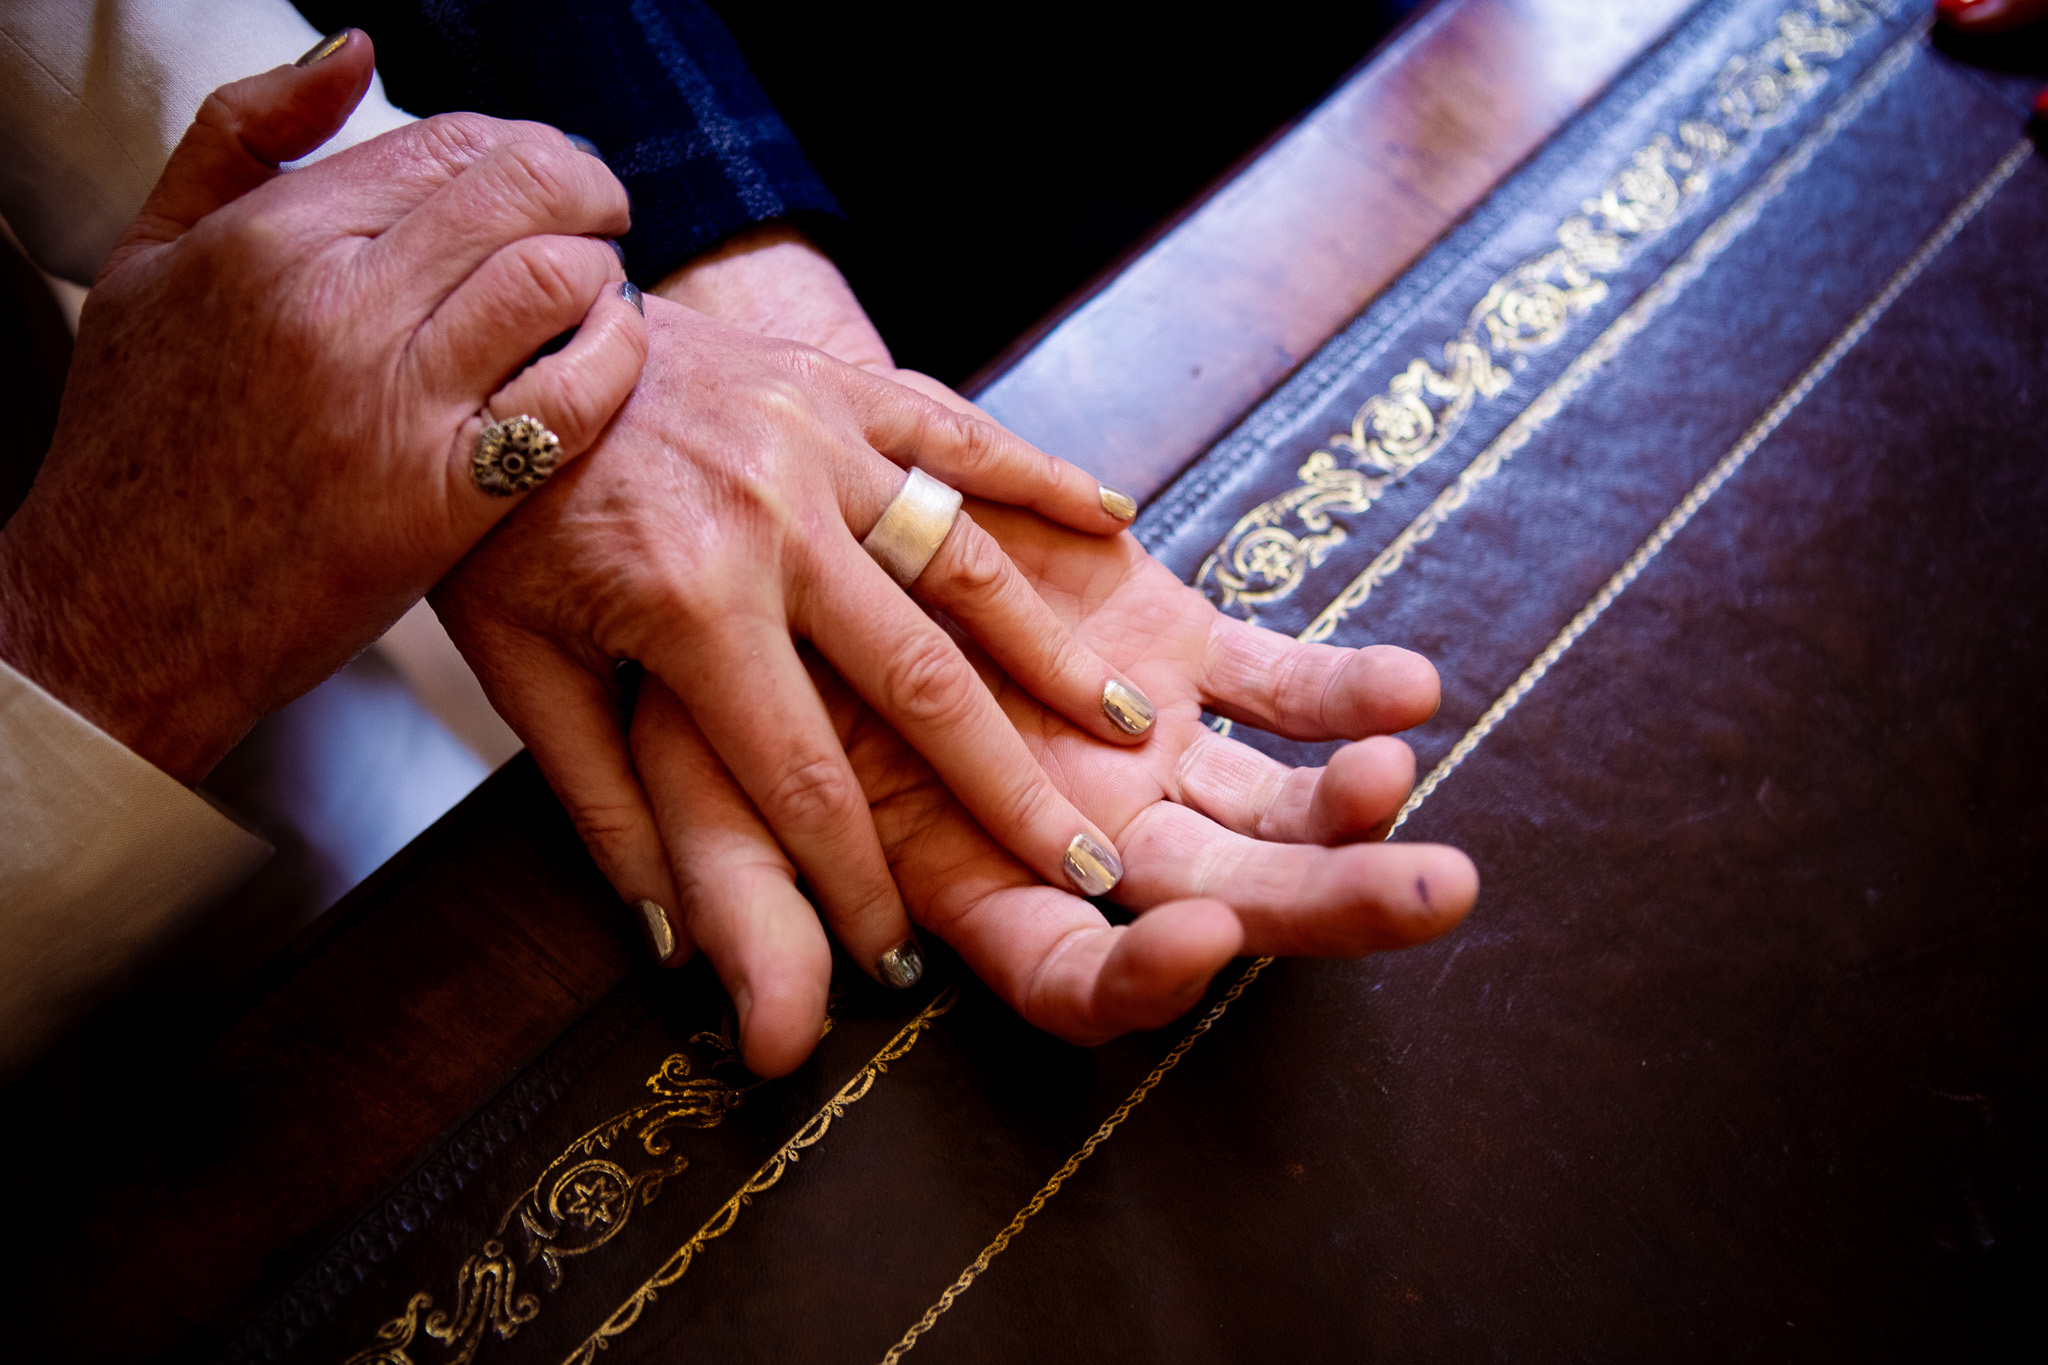 The groom holds out his hand on a desk with his newly wed wife's hand in his wearing her wedding band.